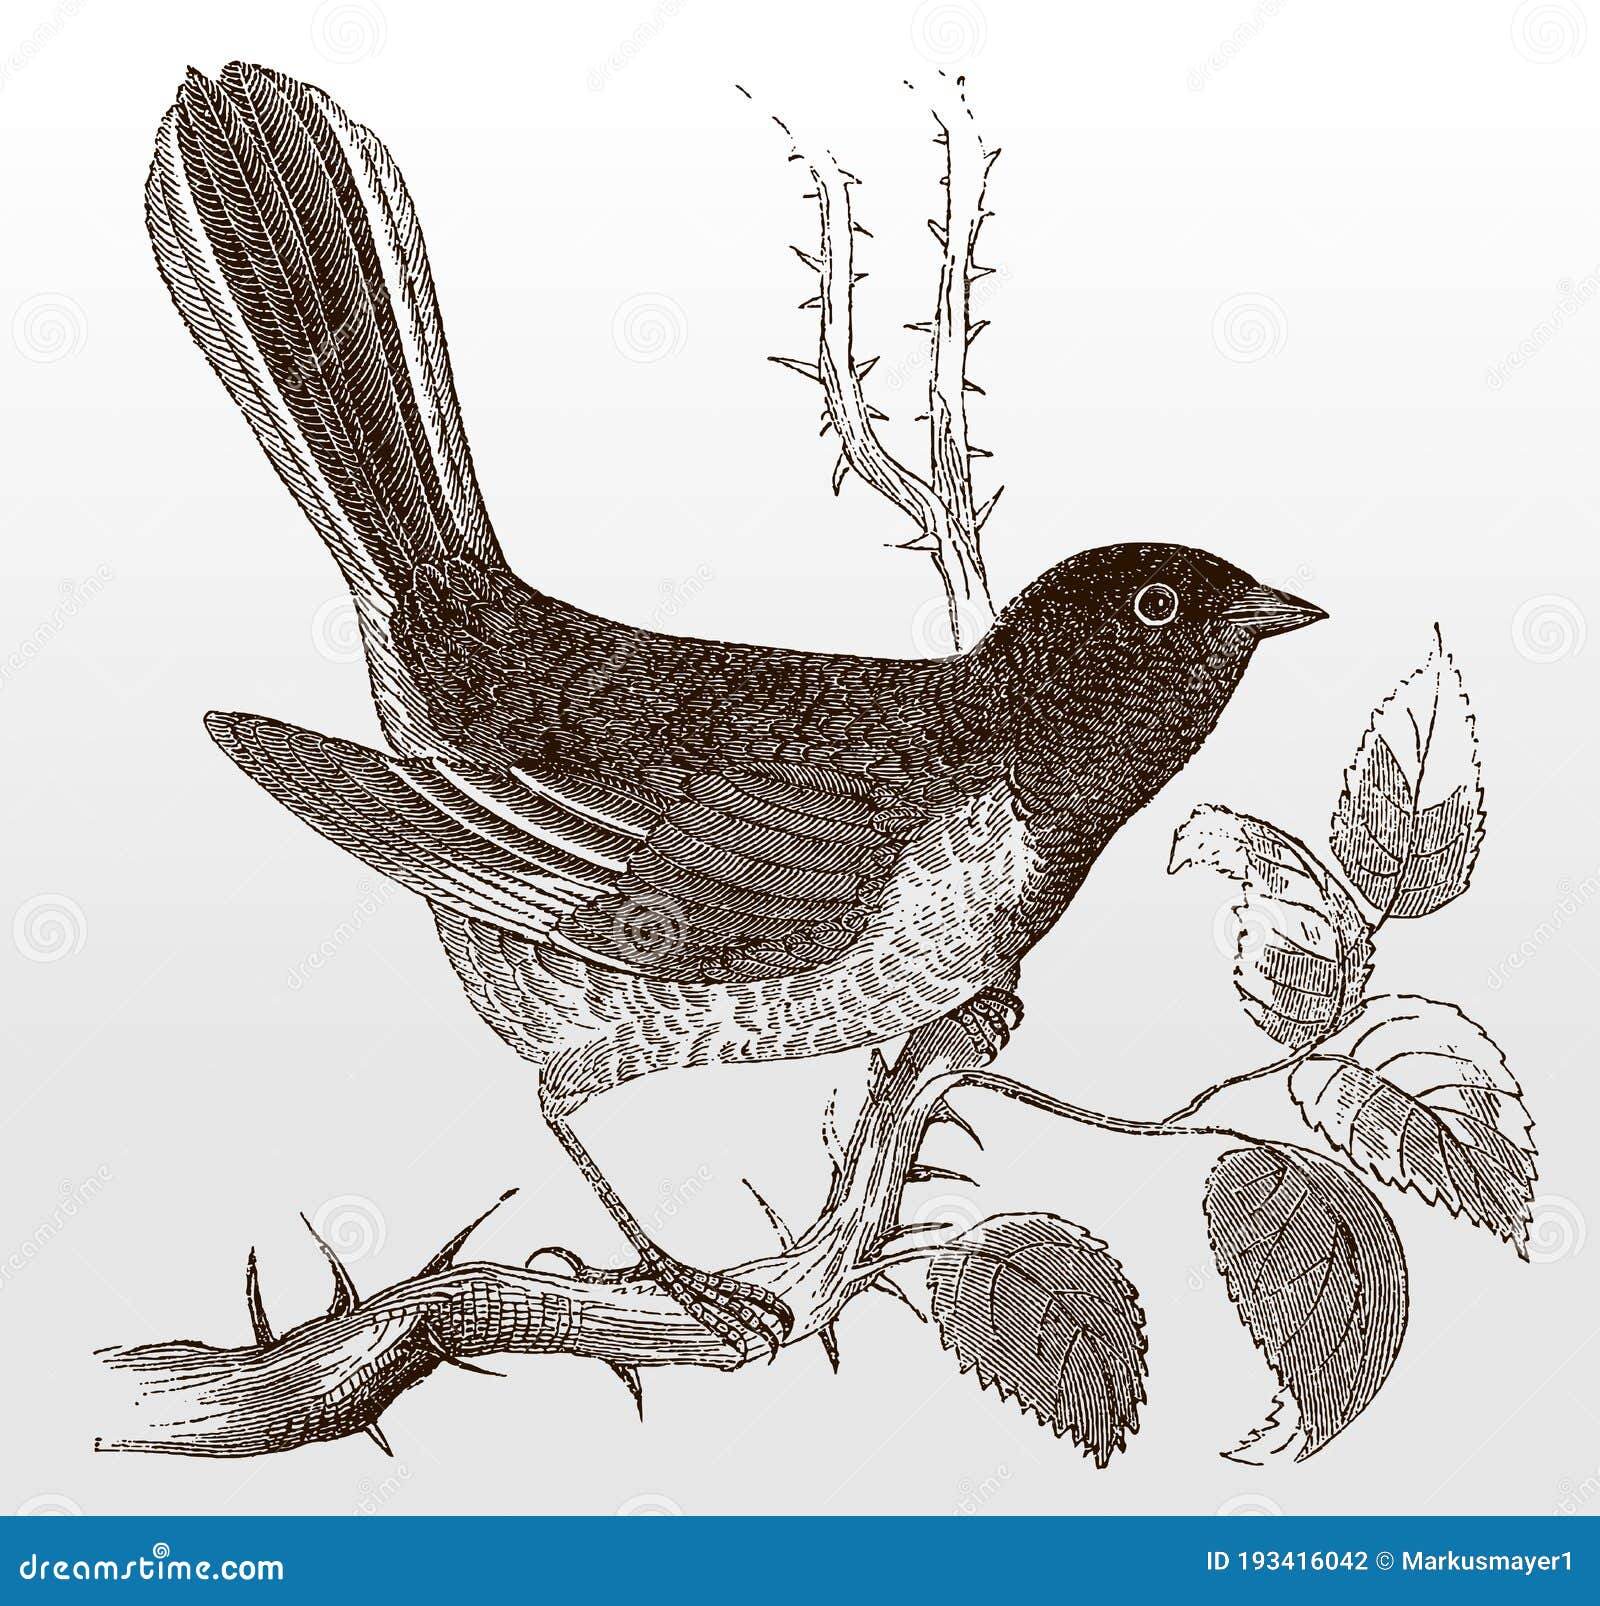 eastern towhee, pipilo erythrophthalmus in side view sitting on a thorny branch